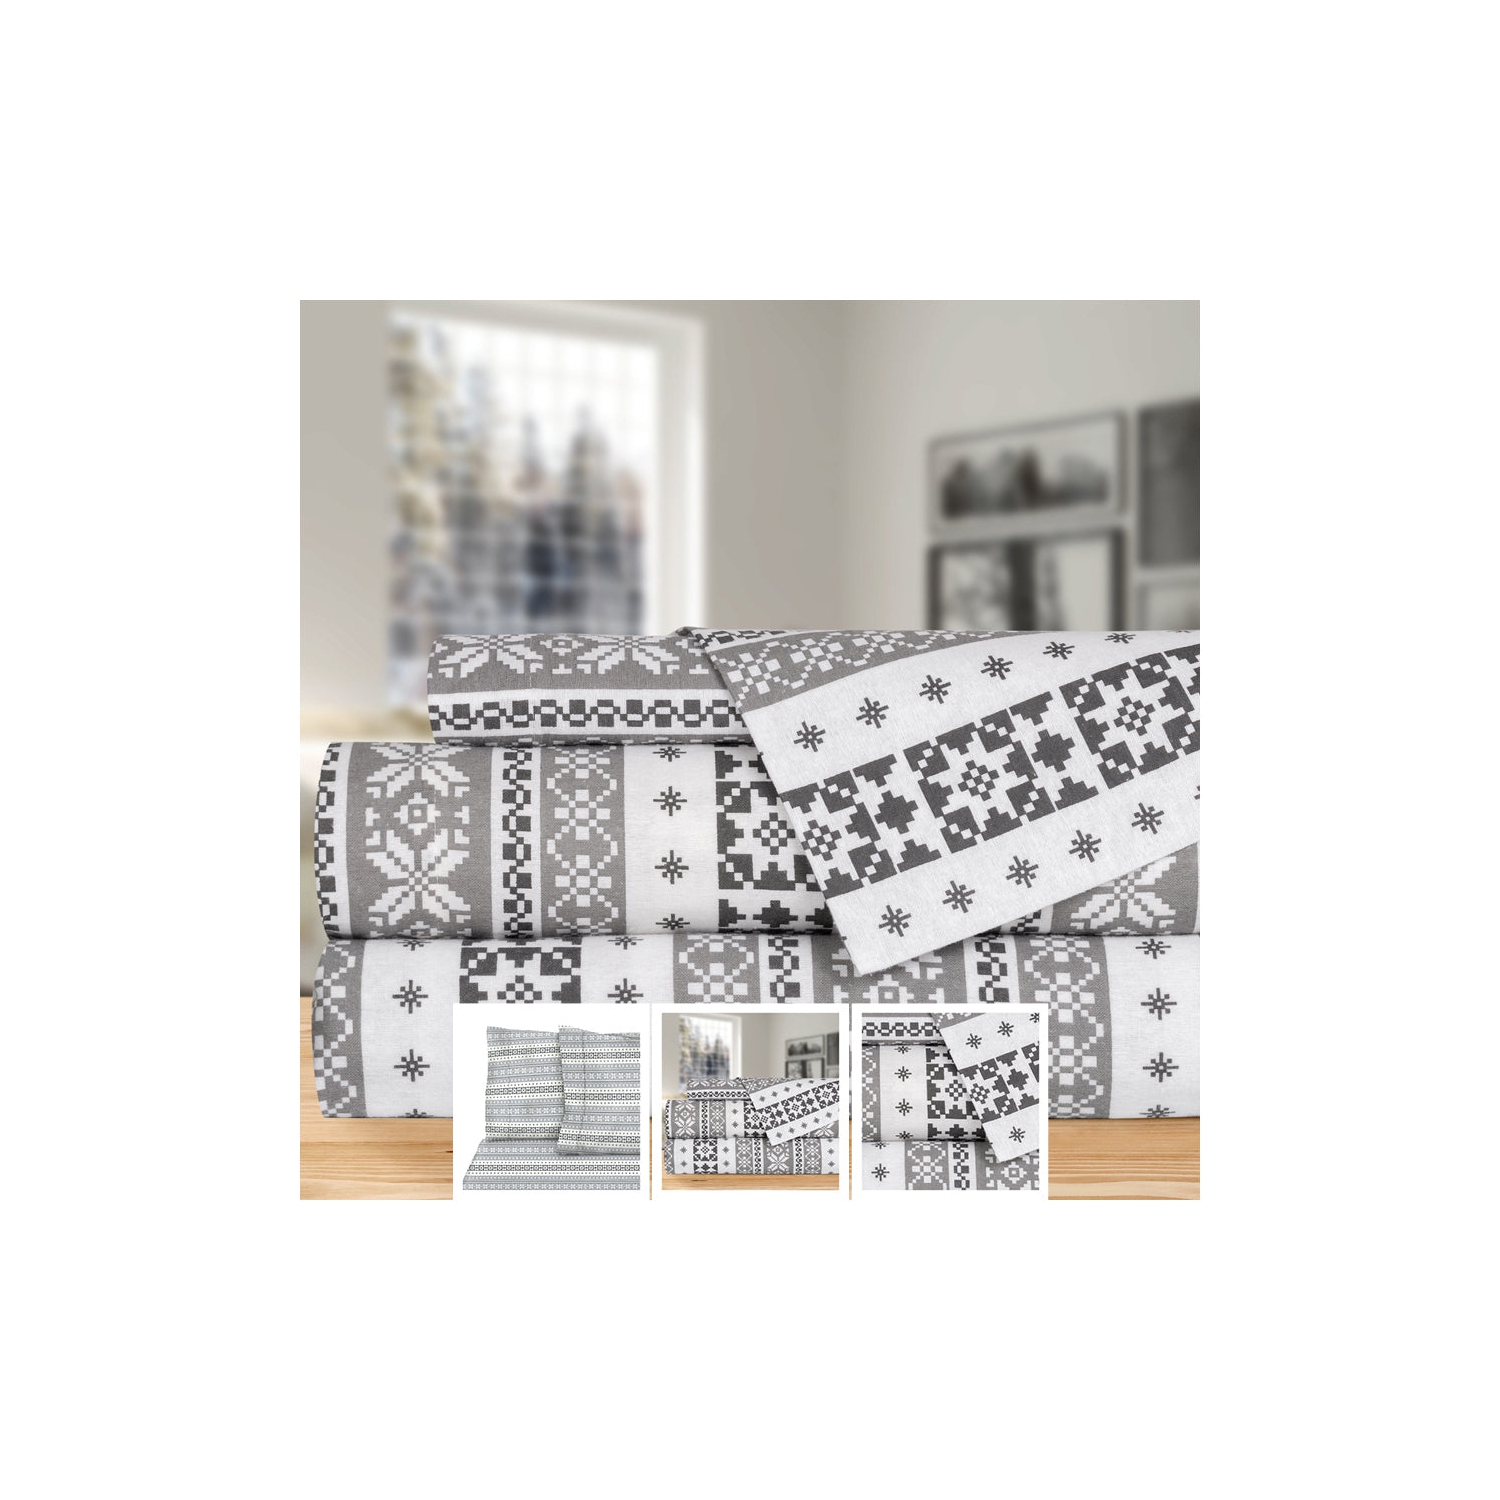 Bebelelo Flannel Rustic Cabin Argyle Snowflakes Twin Bed Sheet Set of 3